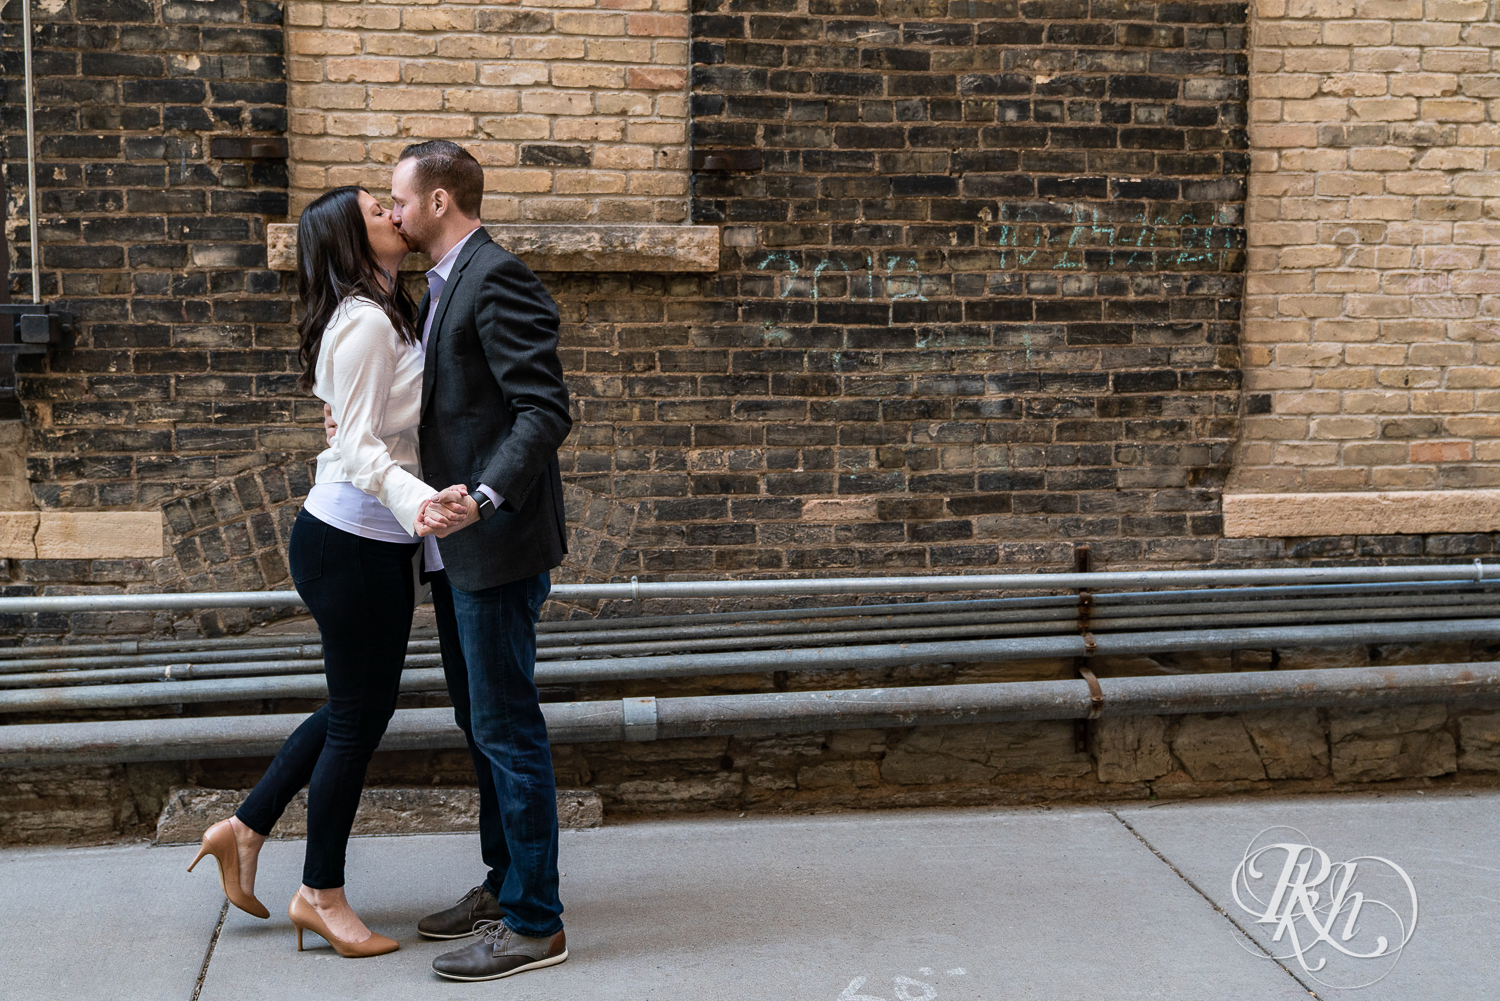 Man in suit and woman kiss in alley at Saint Anthony Main in Minneapolis, Minnesota.